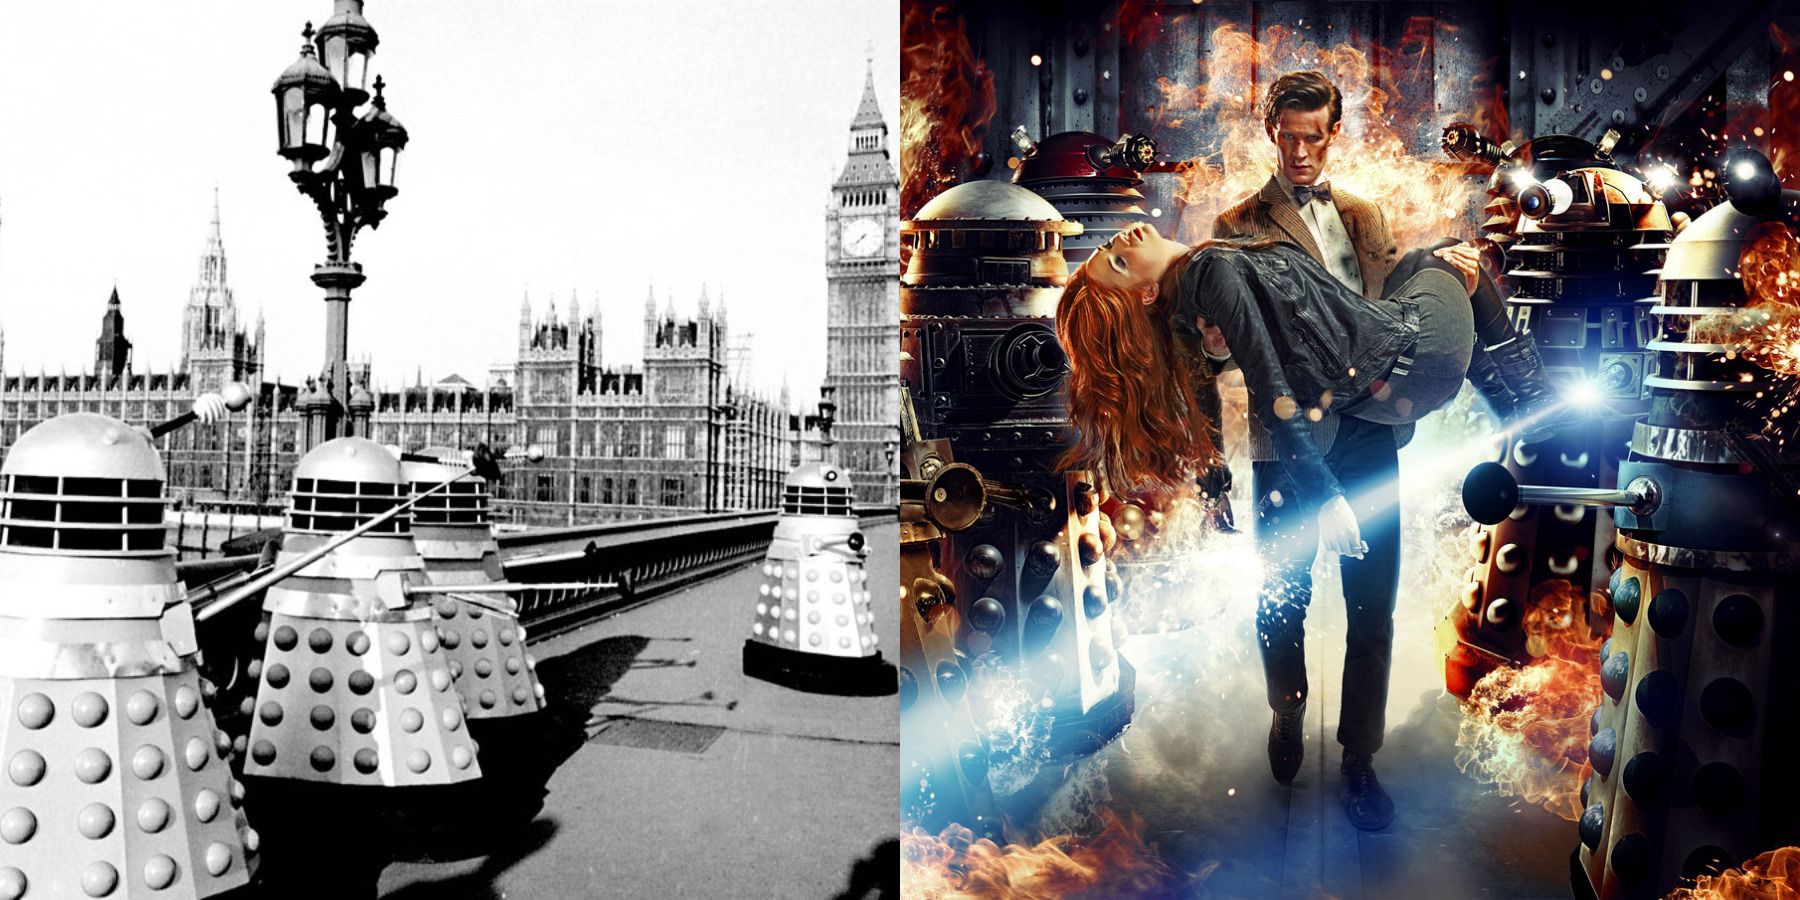 Doctor Who Daleks feature